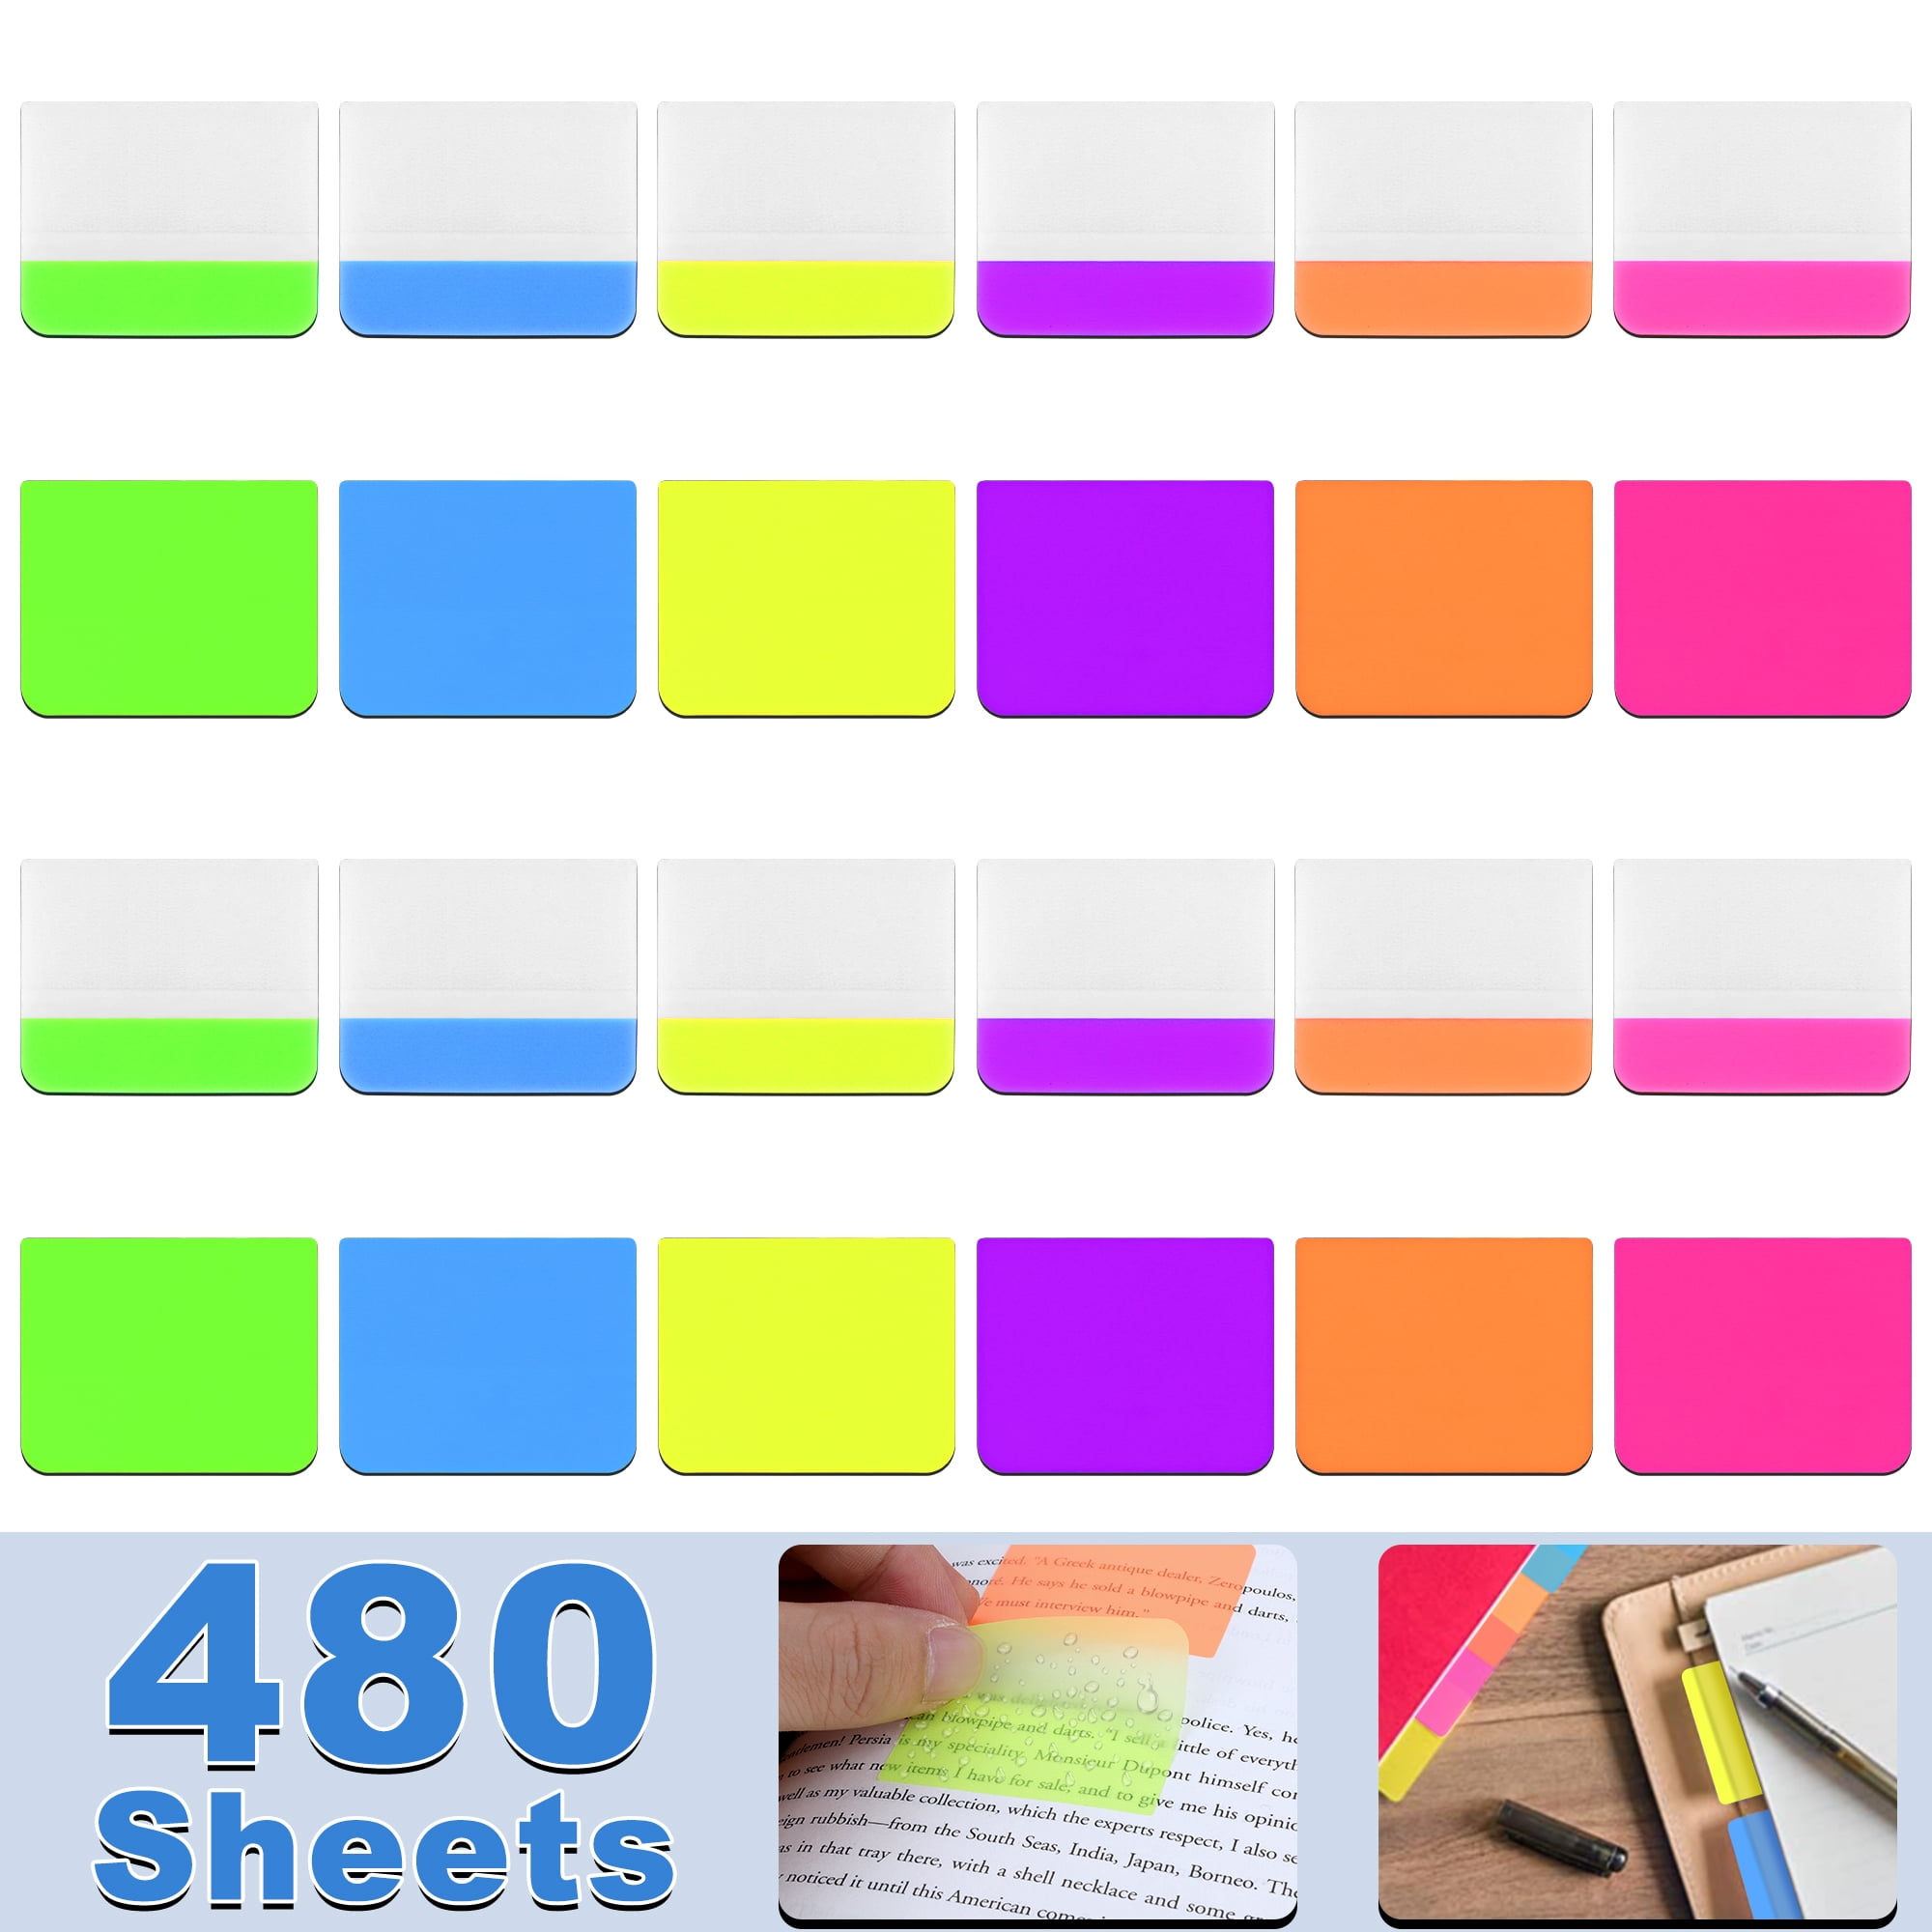 Aesthetic Stuff 1 Set Transparent Sticky Memo Pads Self-Adhesive Note Paper Stickers File Tabs Flags Colored Page Markers Labels for Students